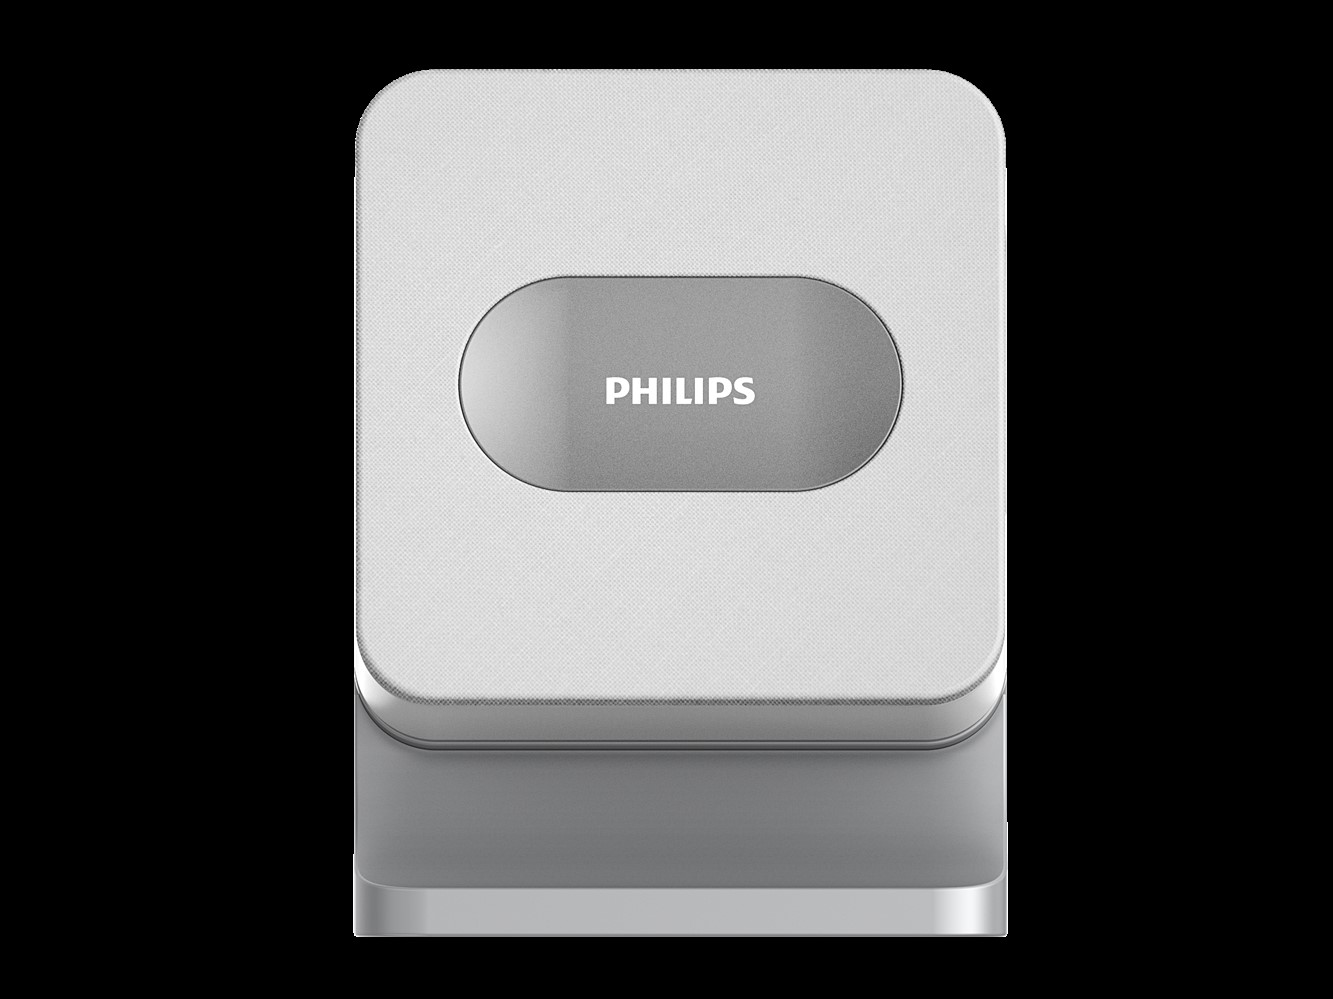 Carillon sans fil PHILIPS WelcomeBell 300 MP3 à piles - 531014